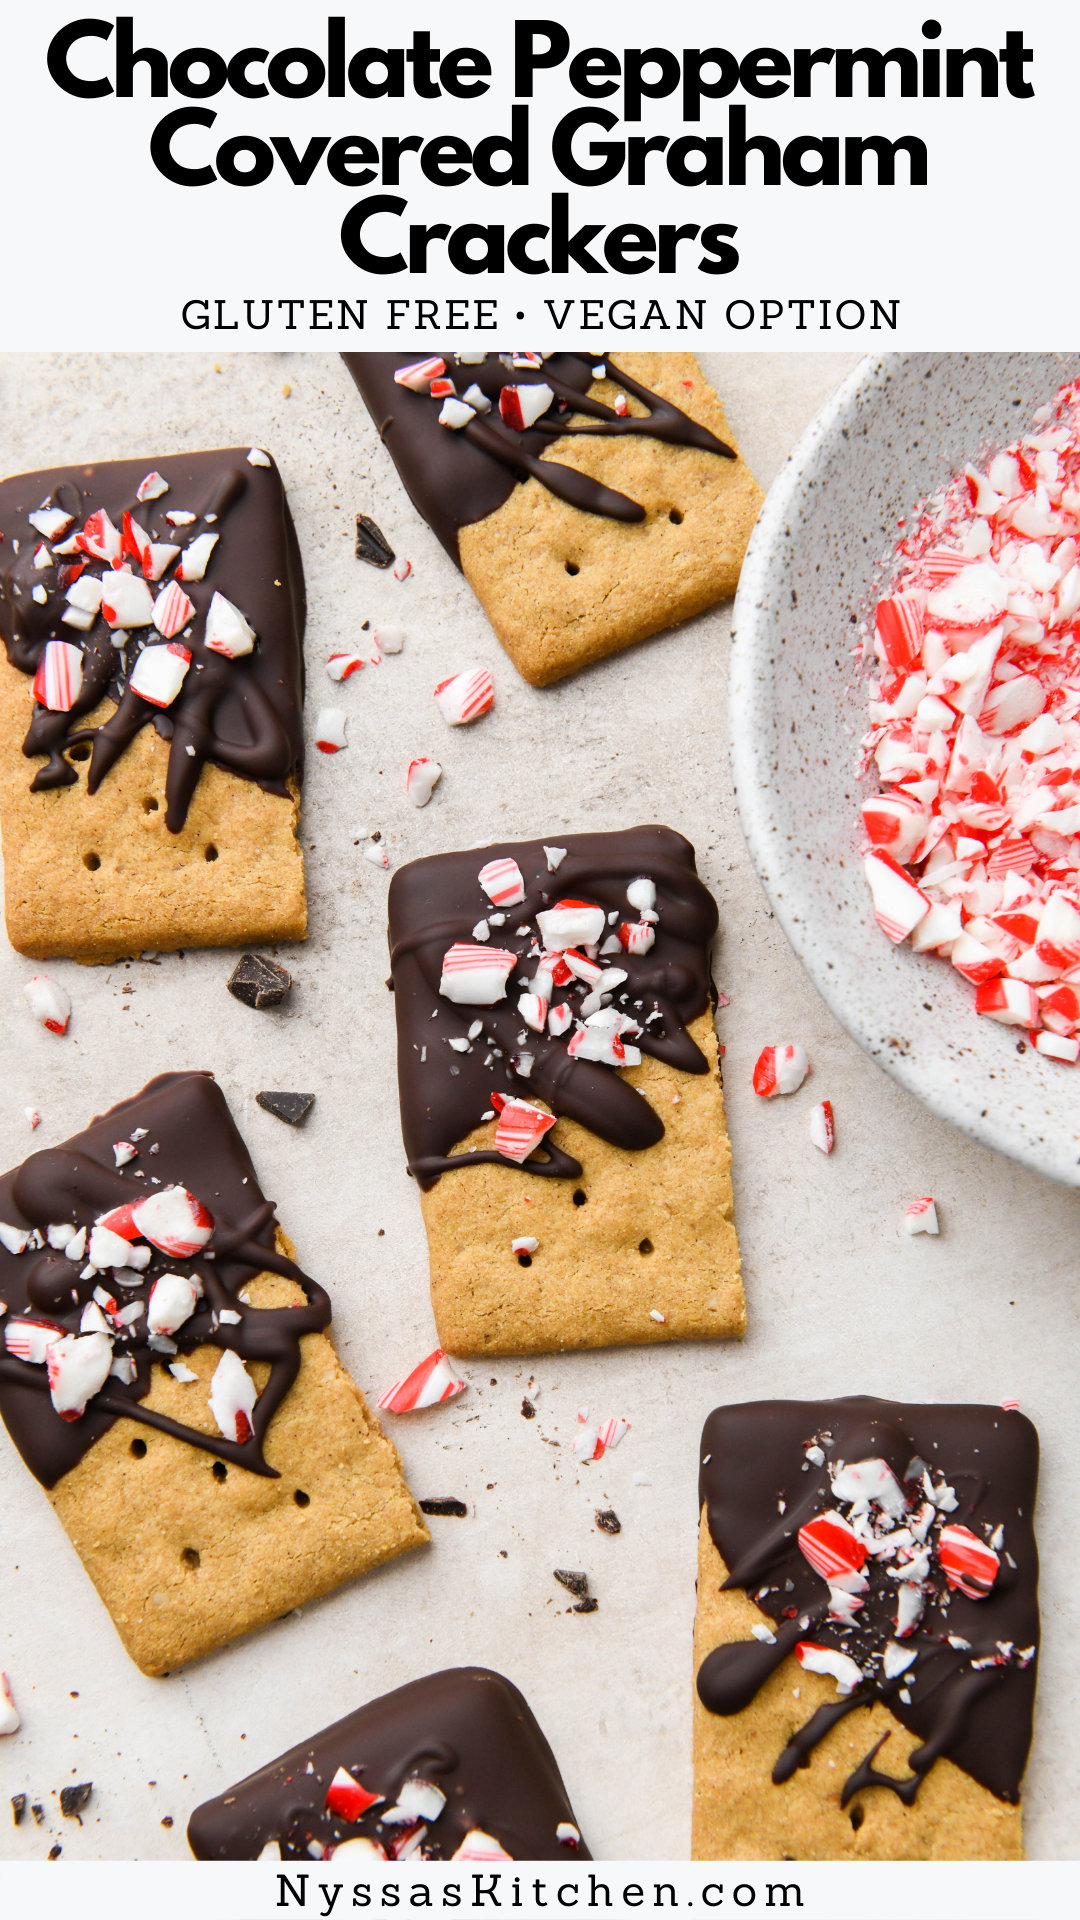 Chocolate peppermint covered graham crackers are a delicious and easy holiday treat! Made with gluten free graham crackers, melted chocolate, peppermint extract, and crushed candy canes - no baking required. A simple and festive dessert that the whole family will love making and eating! Gluten free, vegan option.